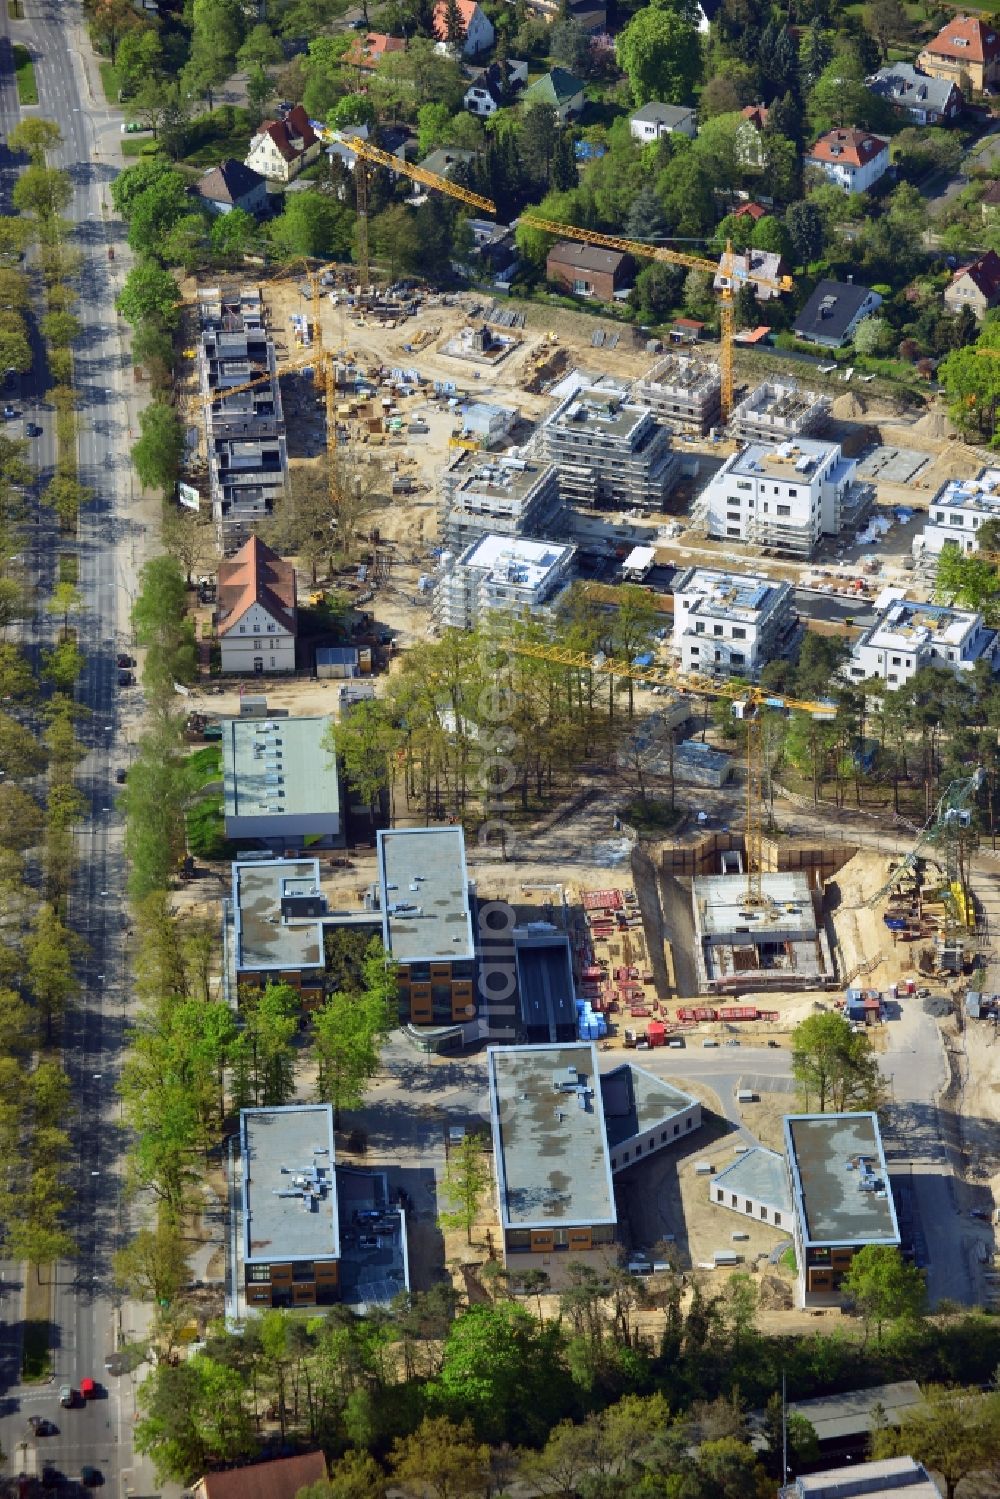 Berlin, Dahlem from above - View of the new construction project Oskar-Helene-Park in the district of Dahlem in Berlin